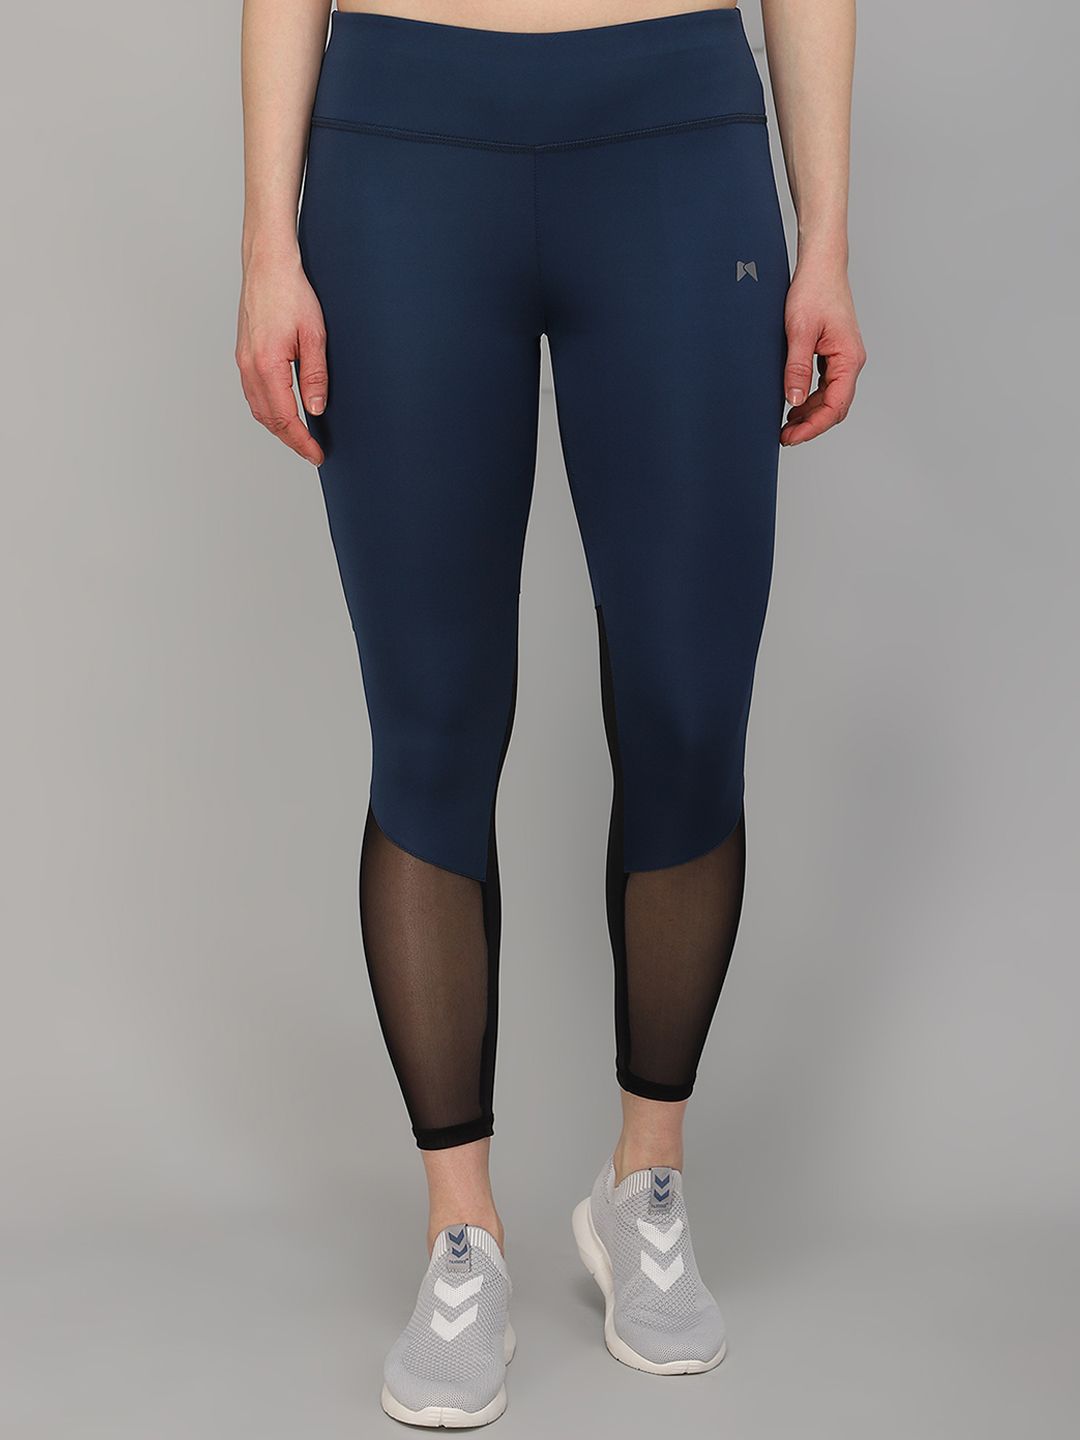 MUSCLE TORQUE Women Navy Blue & Black Ankle Length Tights Price in India